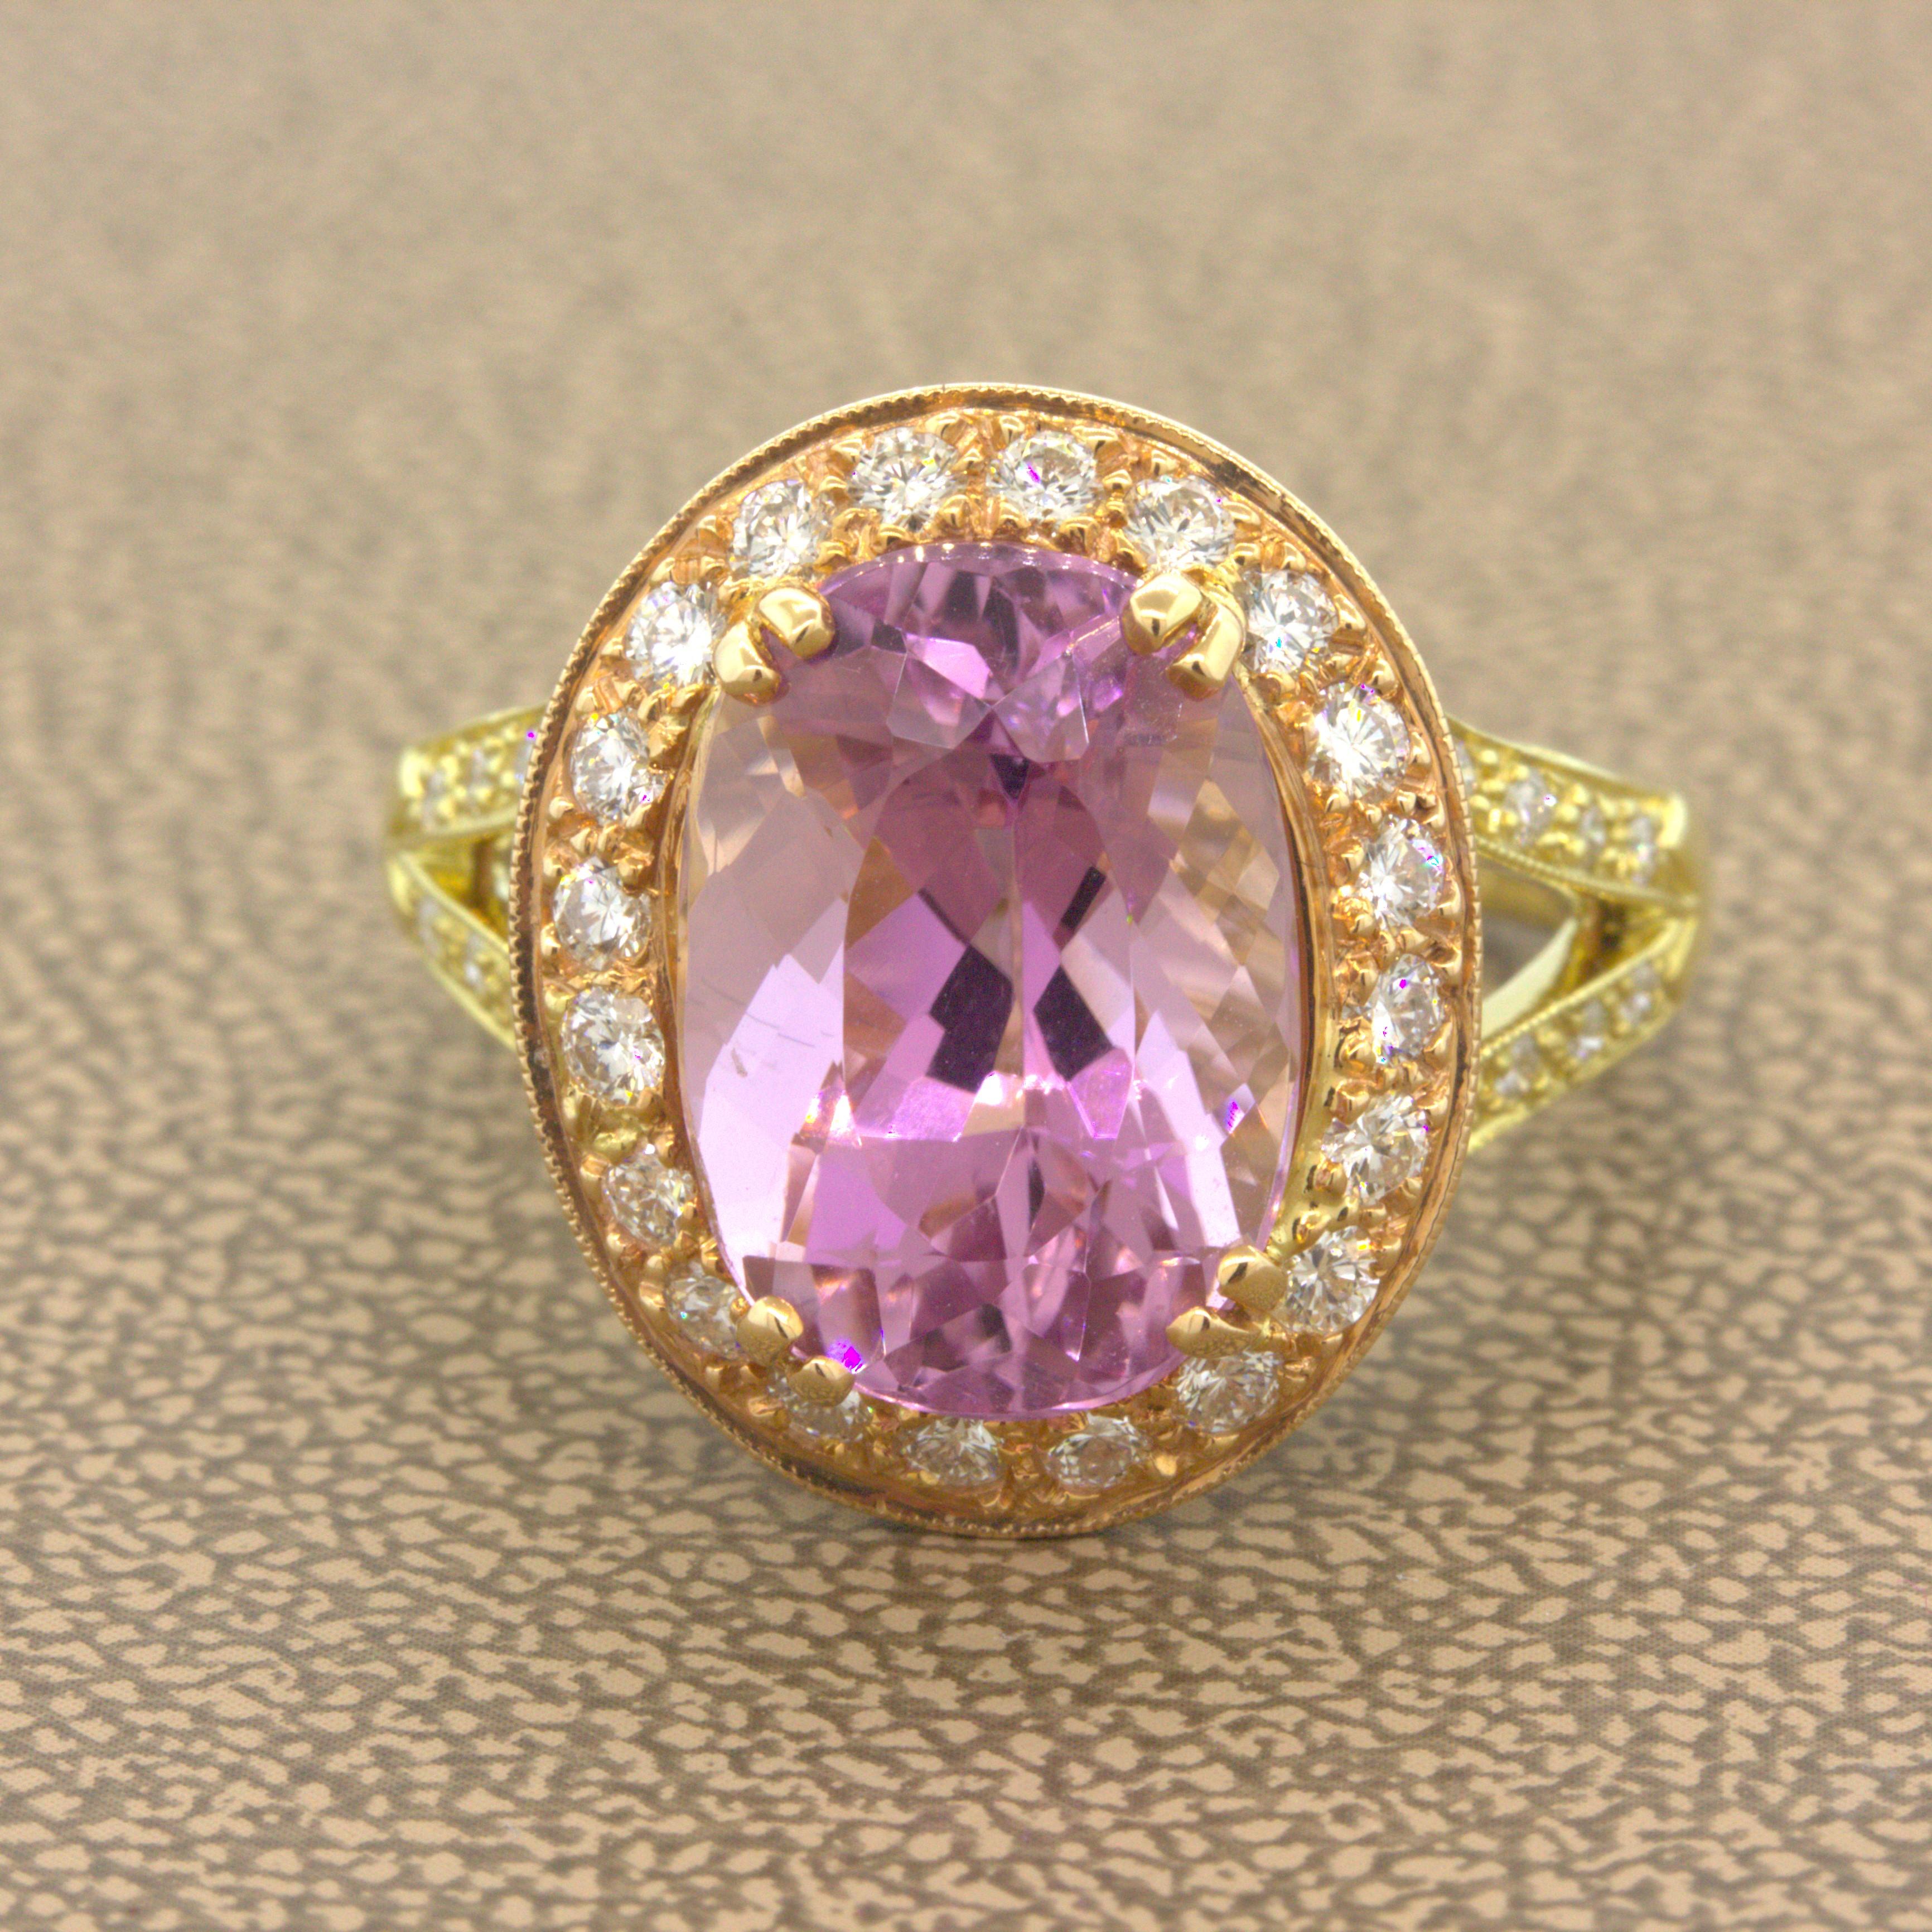 A lovely stylish ring featuring a gem kunzite with a fine pink color weighing 6.99 carats. It is set in 18k rose gold while the sides and shank of the ring is made in yellow gold. There are 1.05 carats of round brilliant-cut diamonds set around the